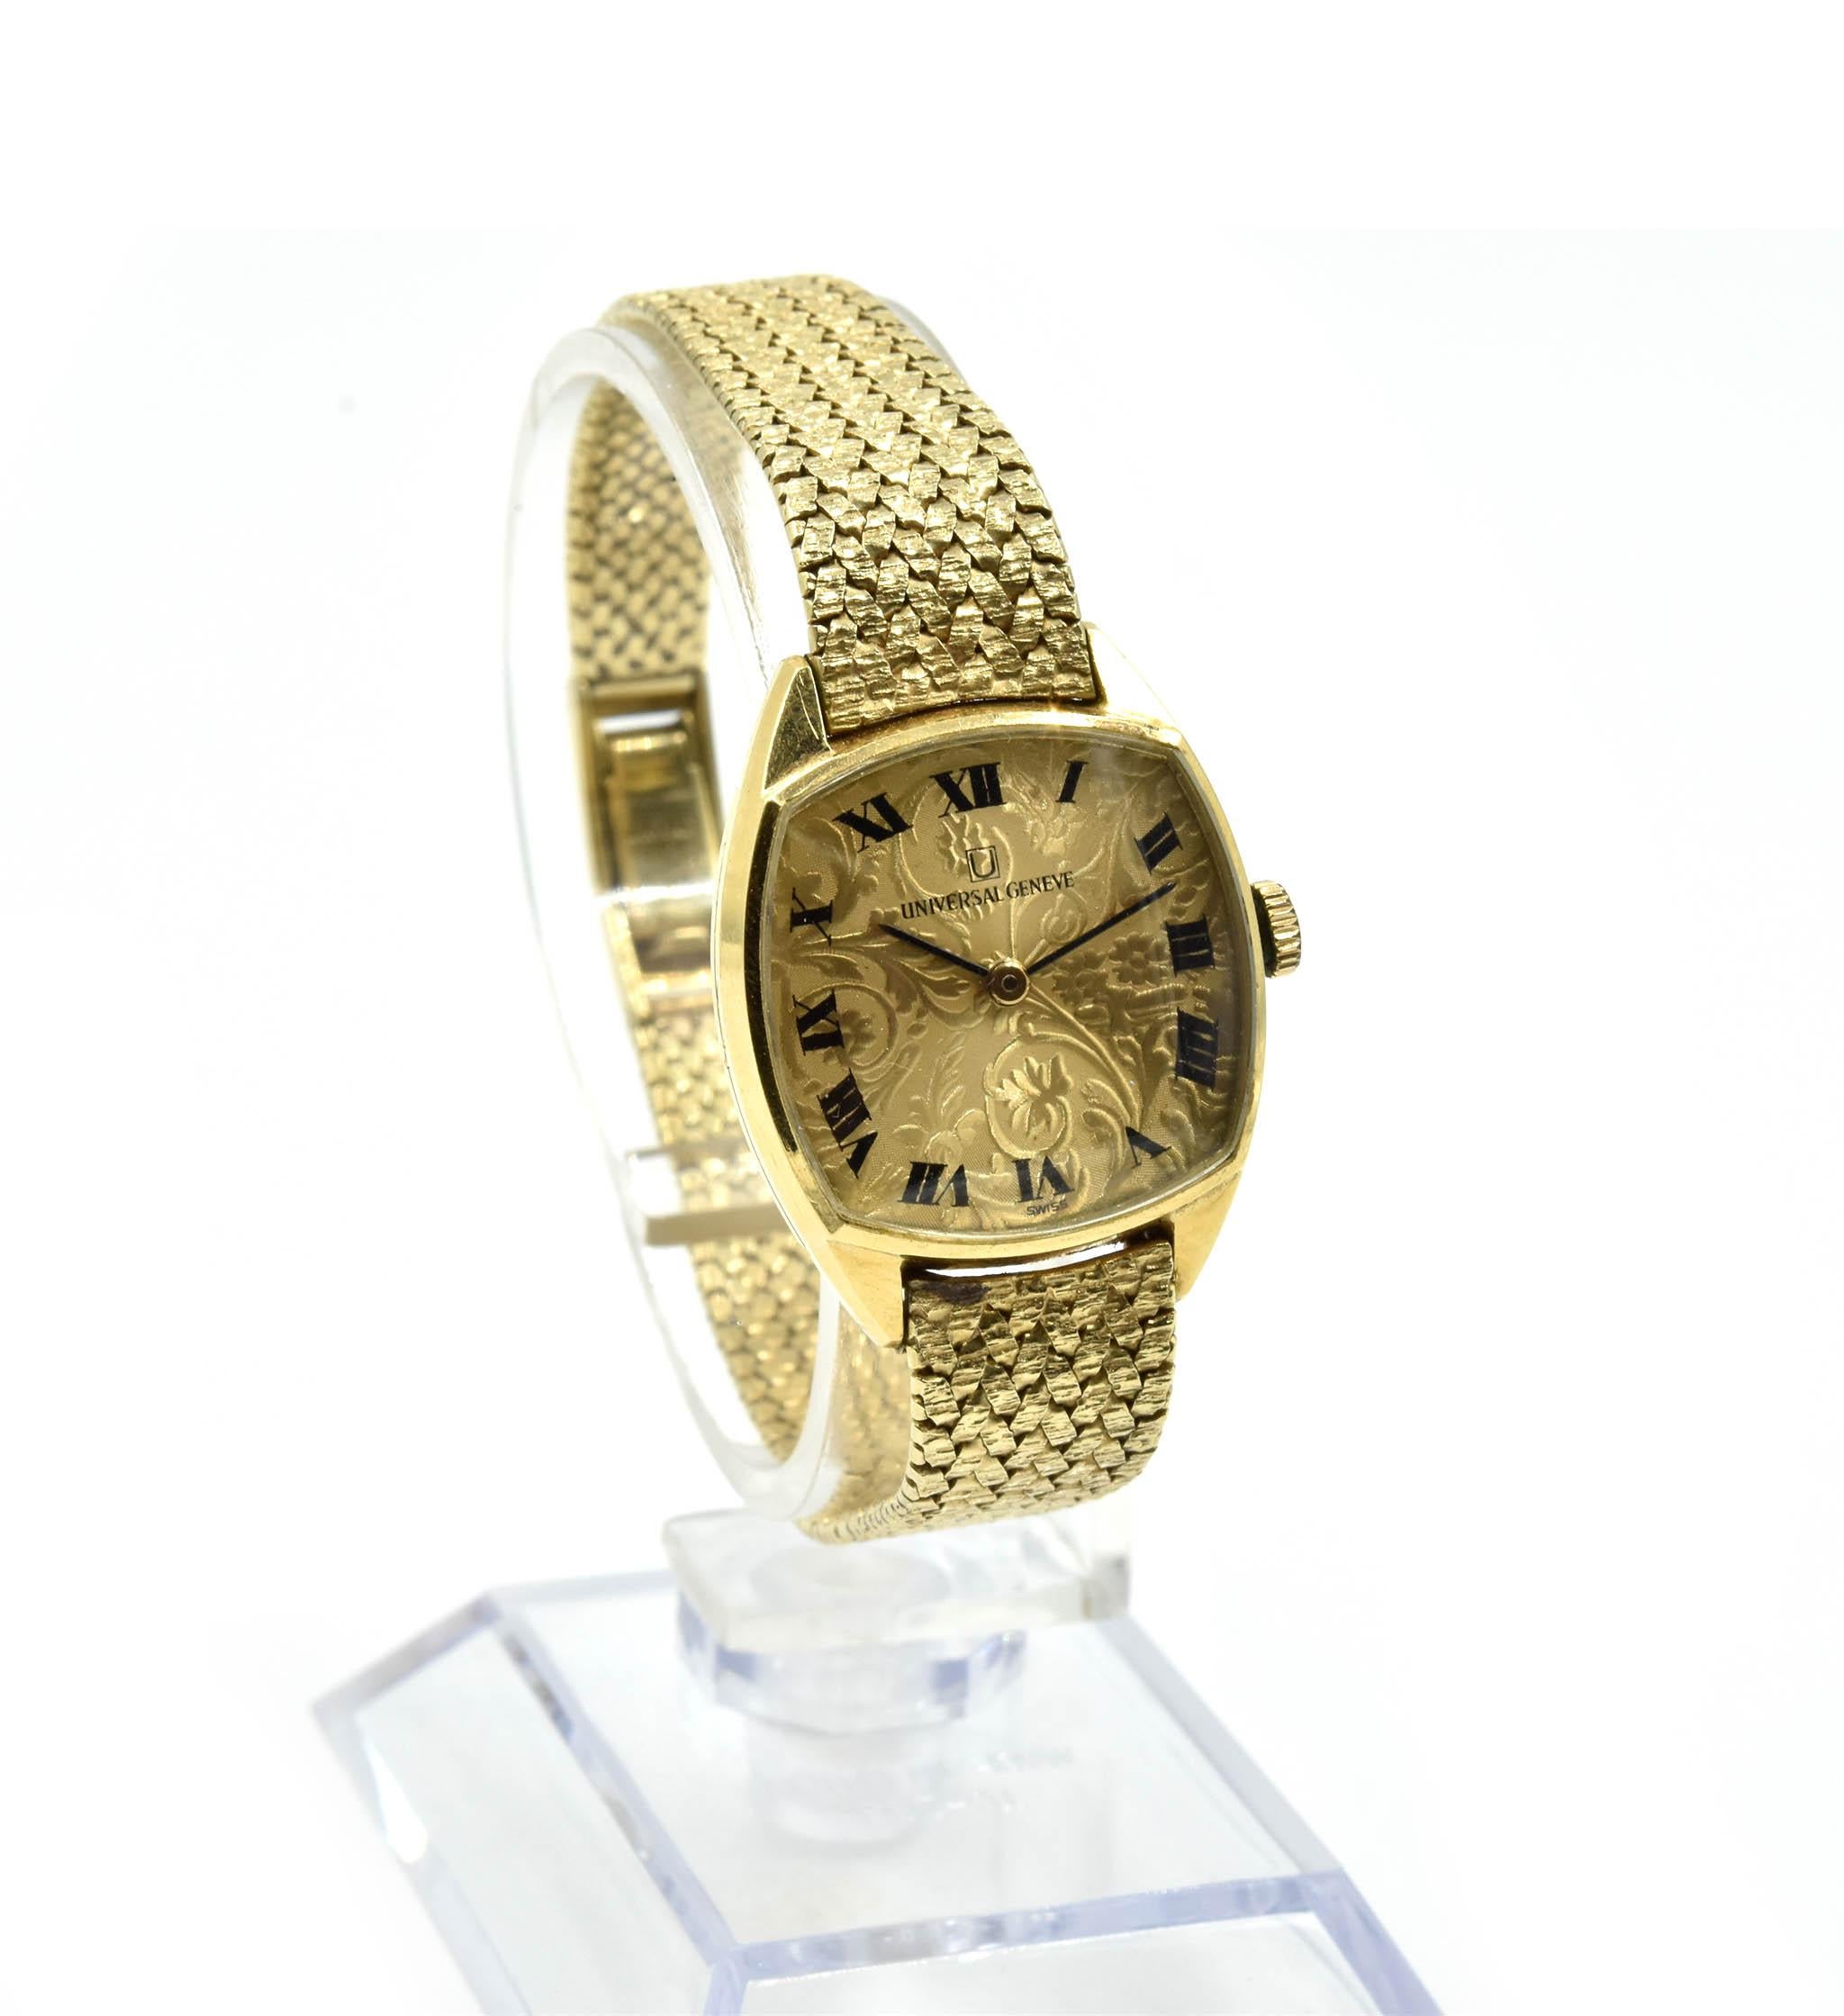 Movement: quartz
Function: hours, minutes
Case: 22x22mm 18k yellow gold case, plastic crystal, pull/push crown
Band: 18k yellow gold woven bracelet with jewelry clasp, bracelet is 6 1/2-inch
Dial: champagne roman numeral dial, black hands
Weight: